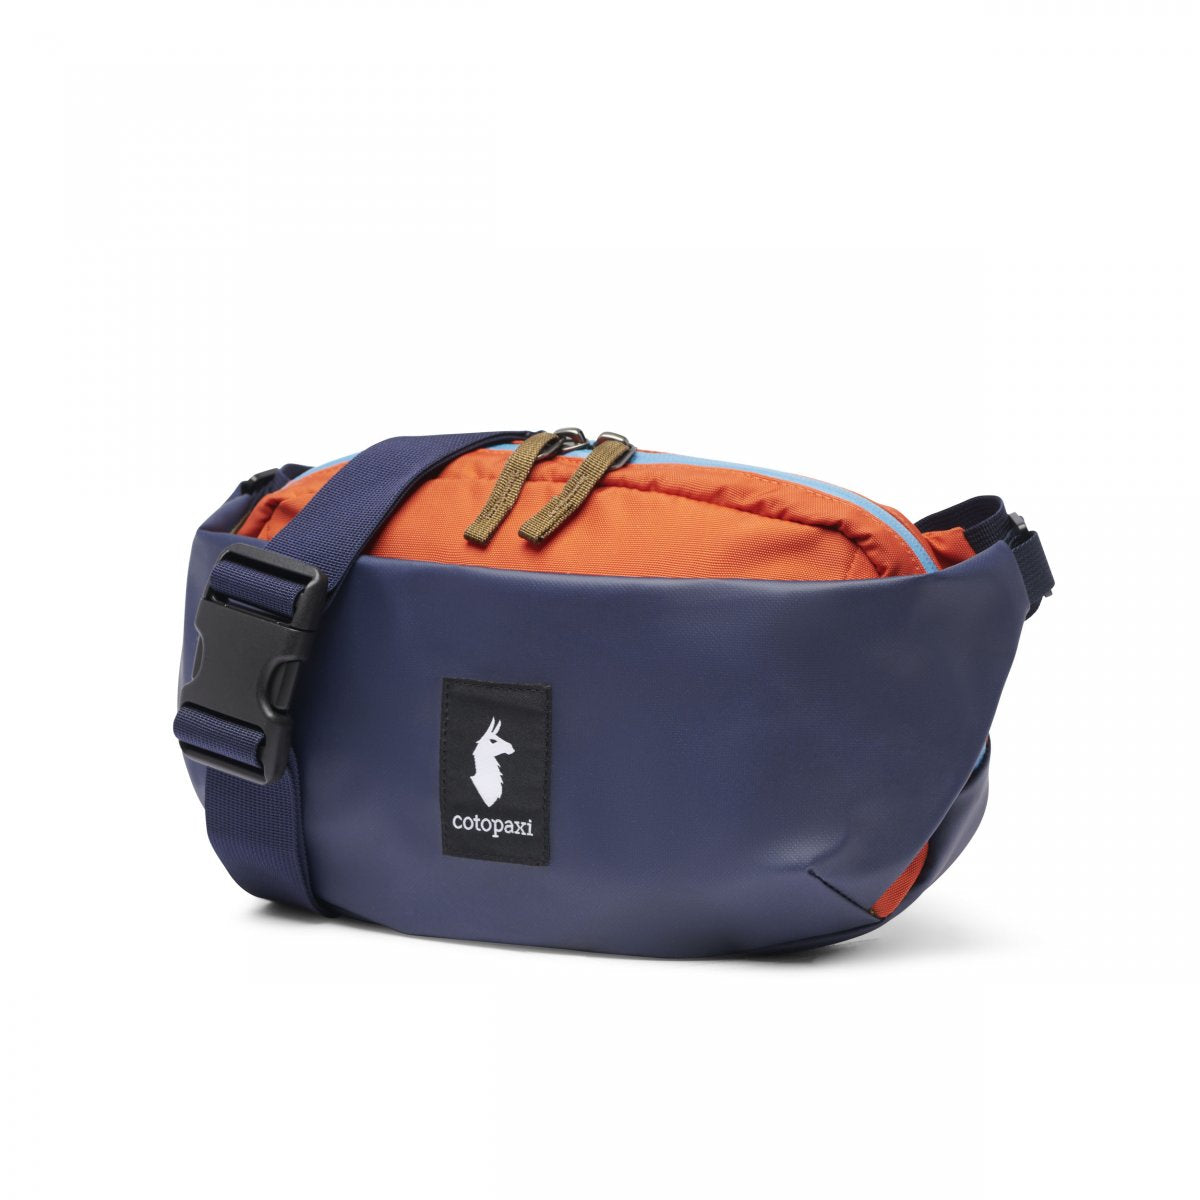 Coso 2L Hip Pack - BAG - COTOPAXI - BF MOUNTAIN